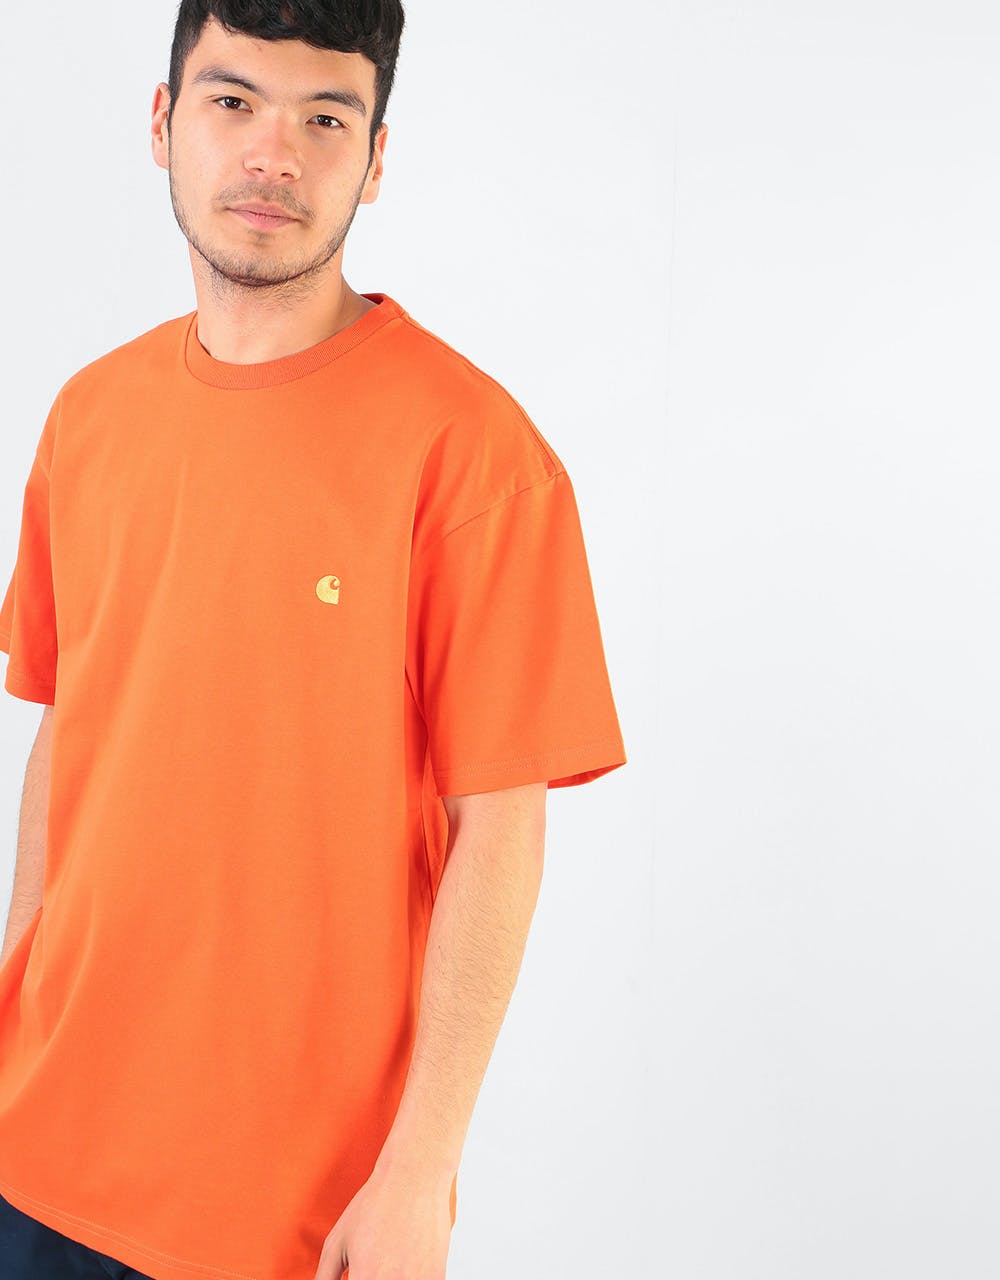 Carhartt WIP S/S Chase T-Shirt - Pepper/Gold